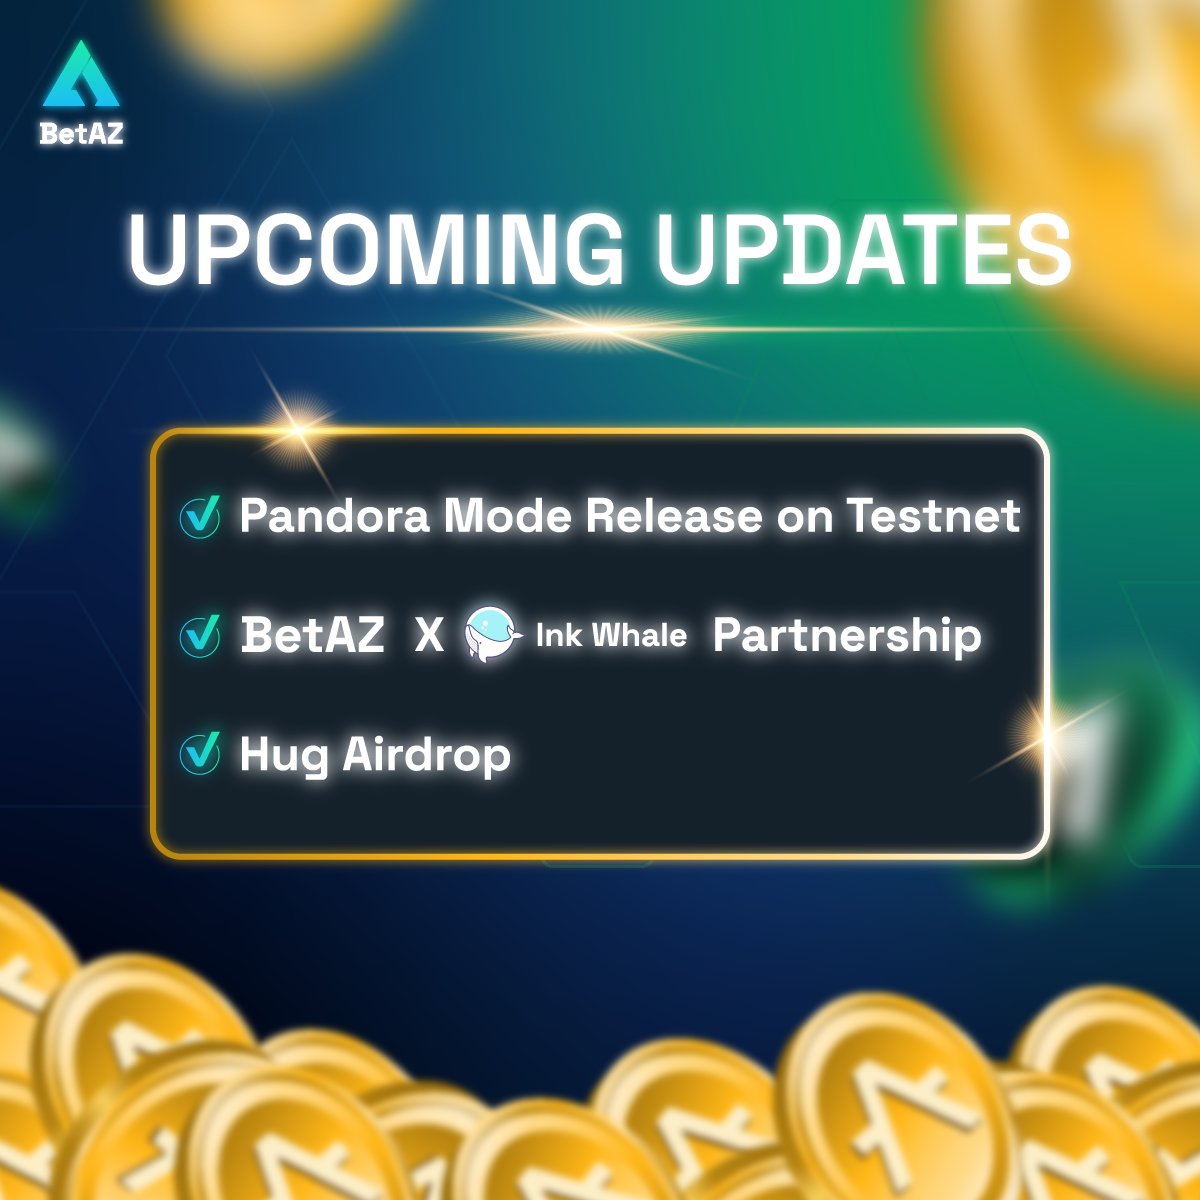 We're thrilled to announce some exciting updates coming soon! Take a look: ✅ New gameplay mode launching on Testnet: #Pandora ✅ Collaborations and partnerships with projects in the @Aleph__Zero ecosystem. Excited to welcome @inkwhale_net as our first partner! ✅ Huge Airdrop…